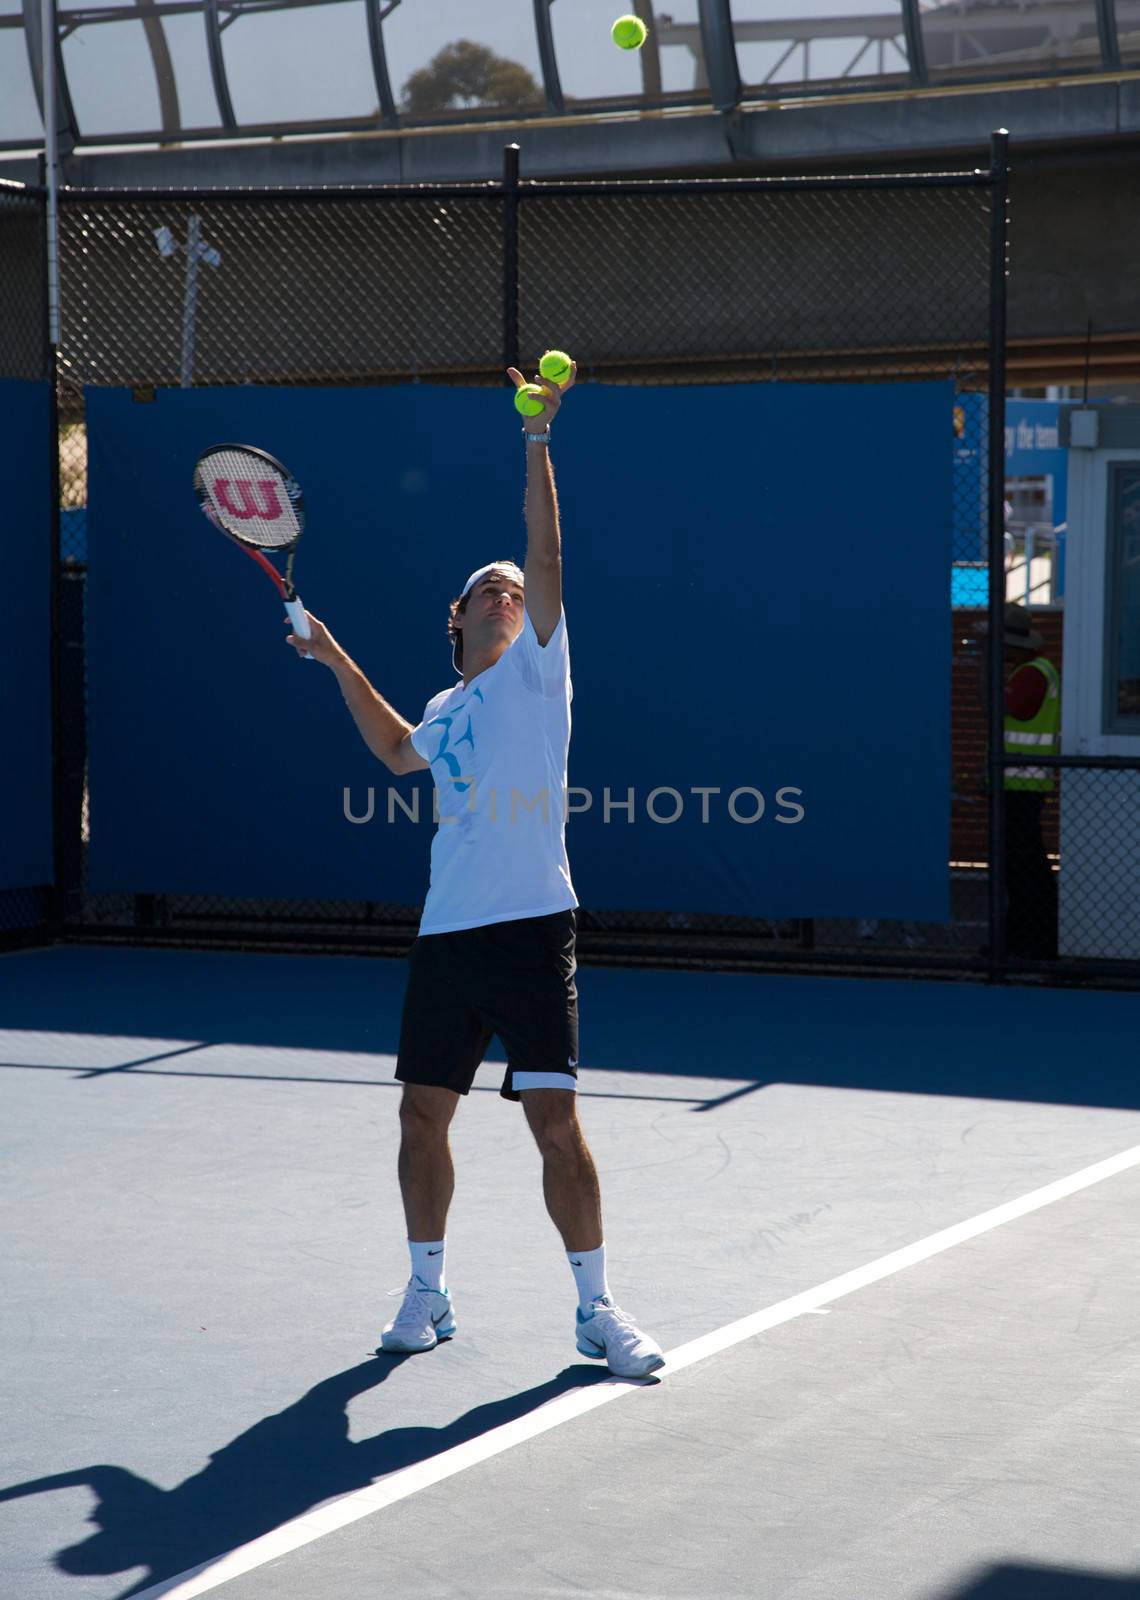 Roger Federer During his Practicing Session at Australia Open Tournament in Melbourne